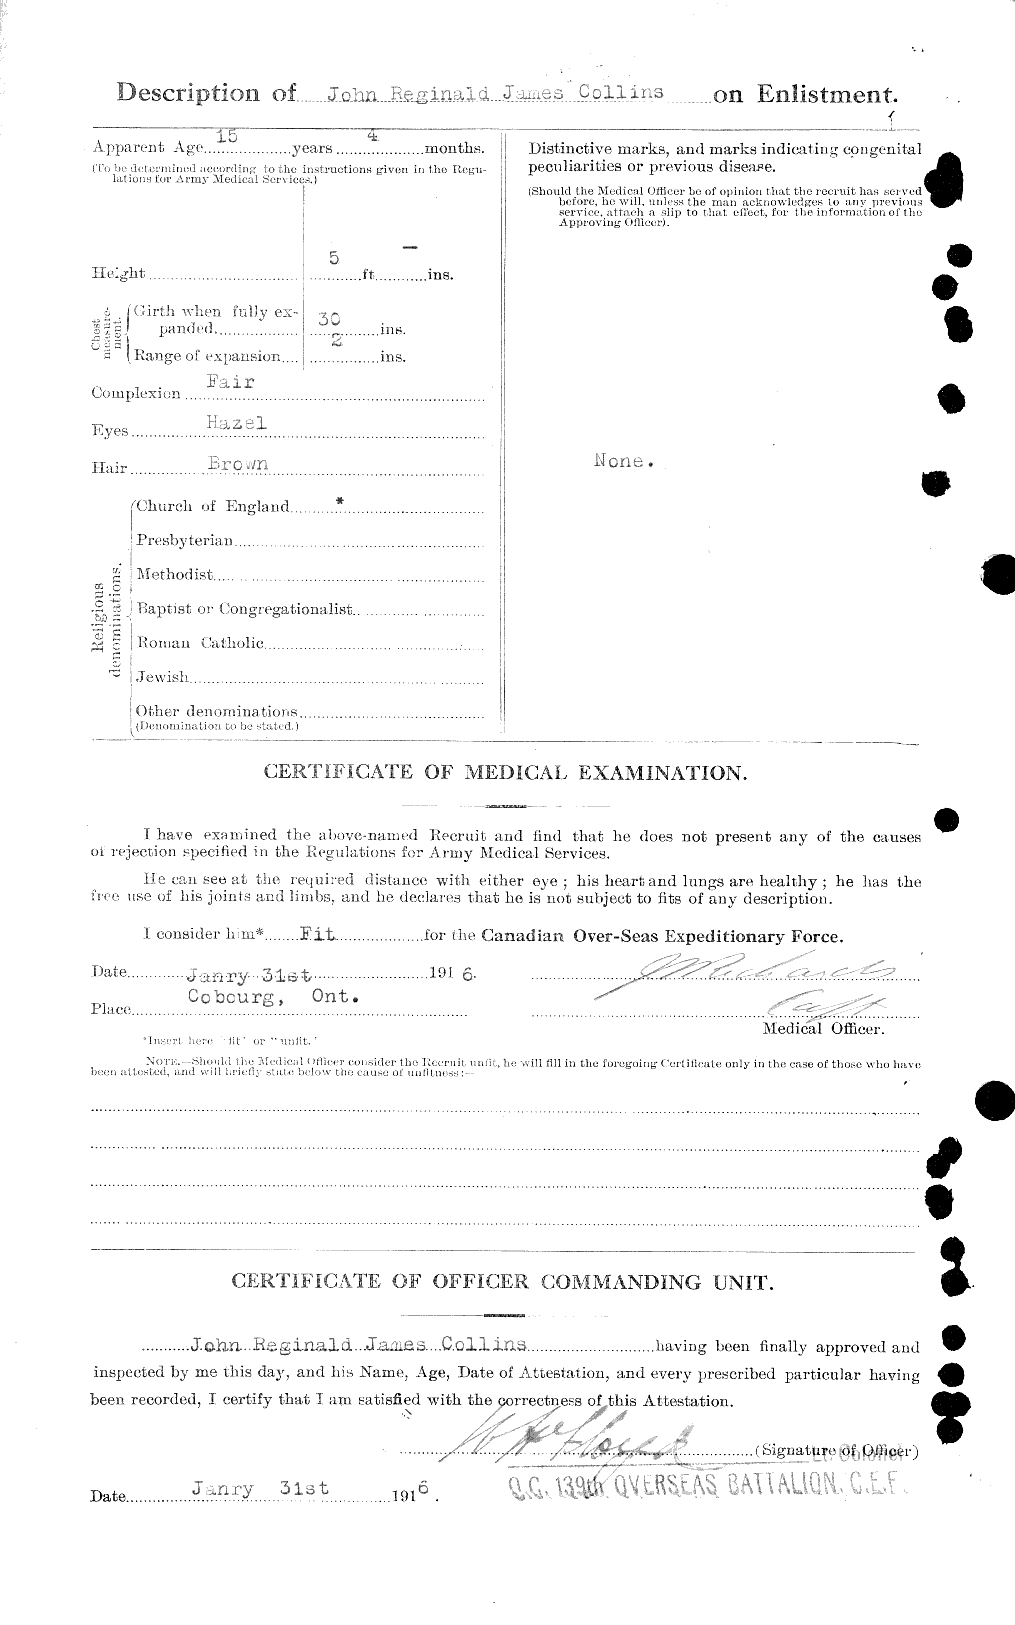 Personnel Records of the First World War - CEF 034380b